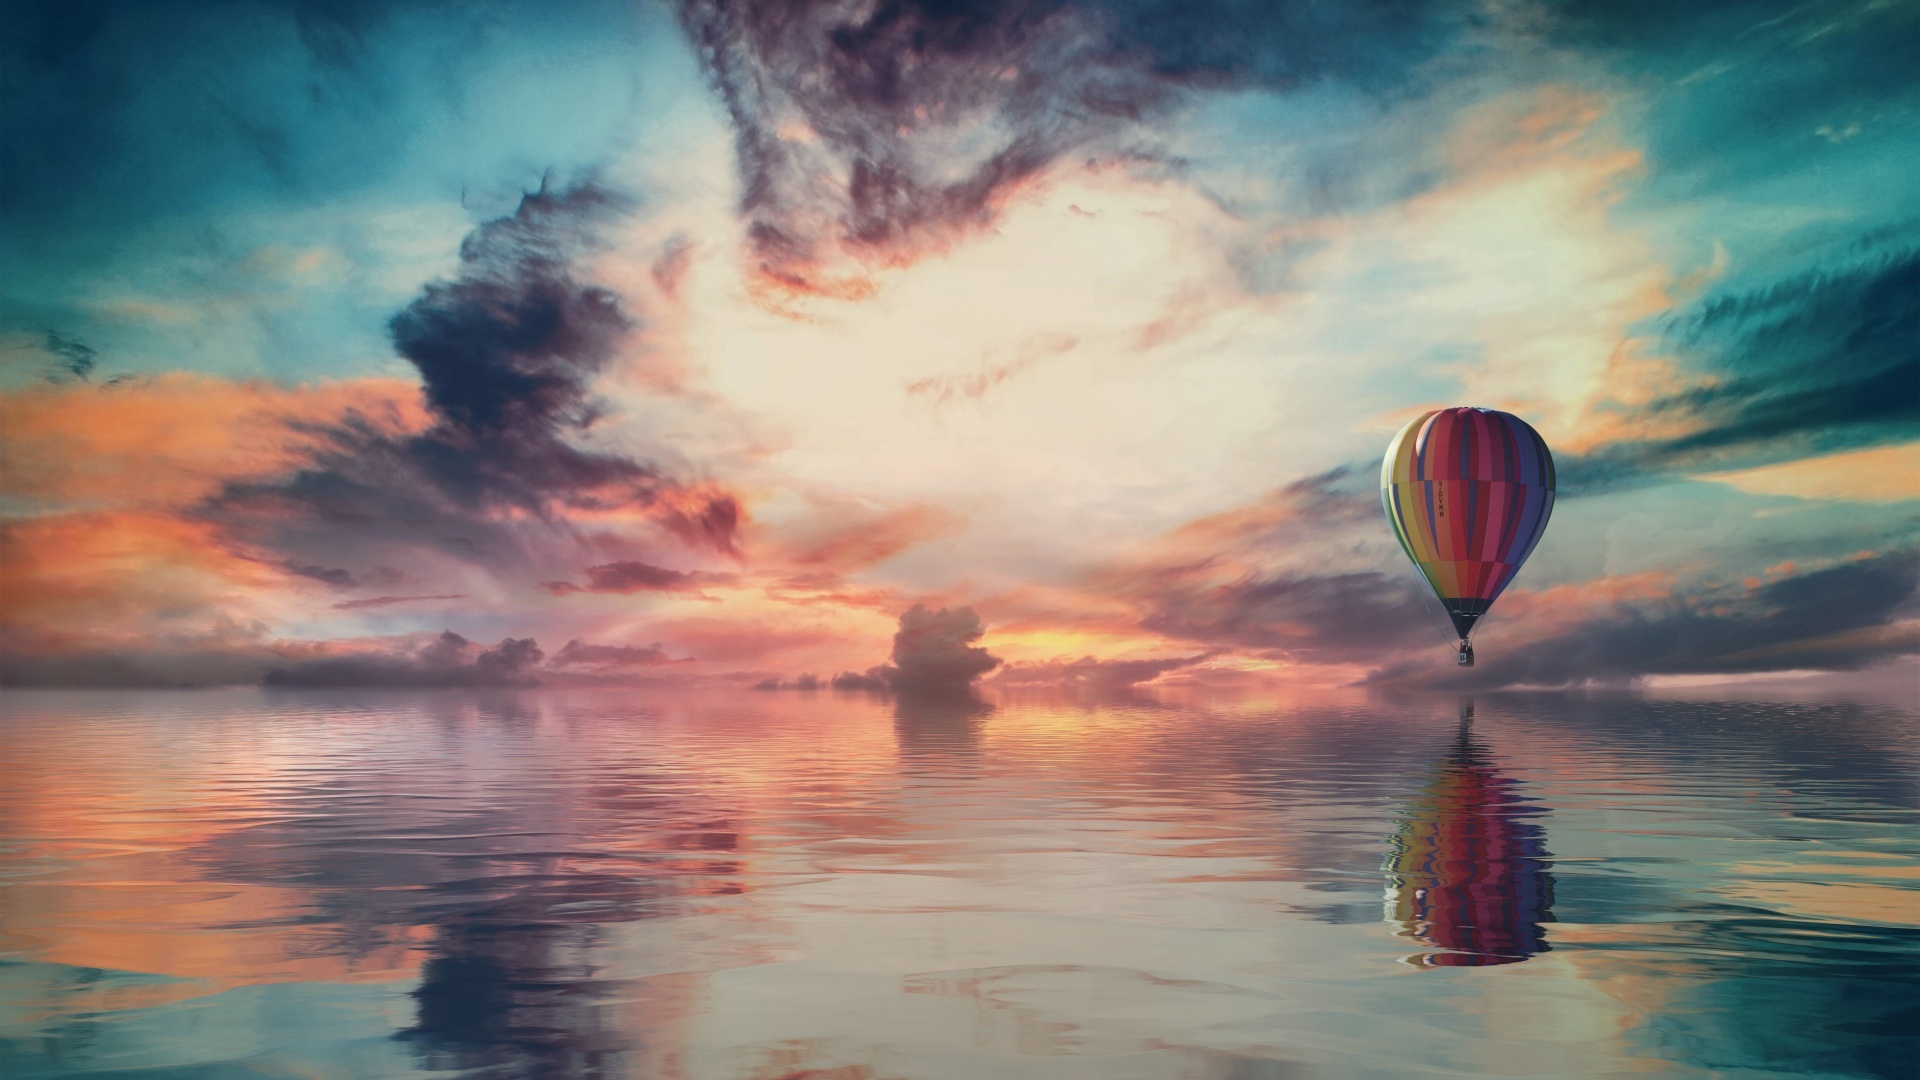 Hot Air Balloon: Burner With Liquid Propane, Aircraft, Flight Over The Quiet Water, Spherical Free Balloon. 1920x1080 Full HD Background.